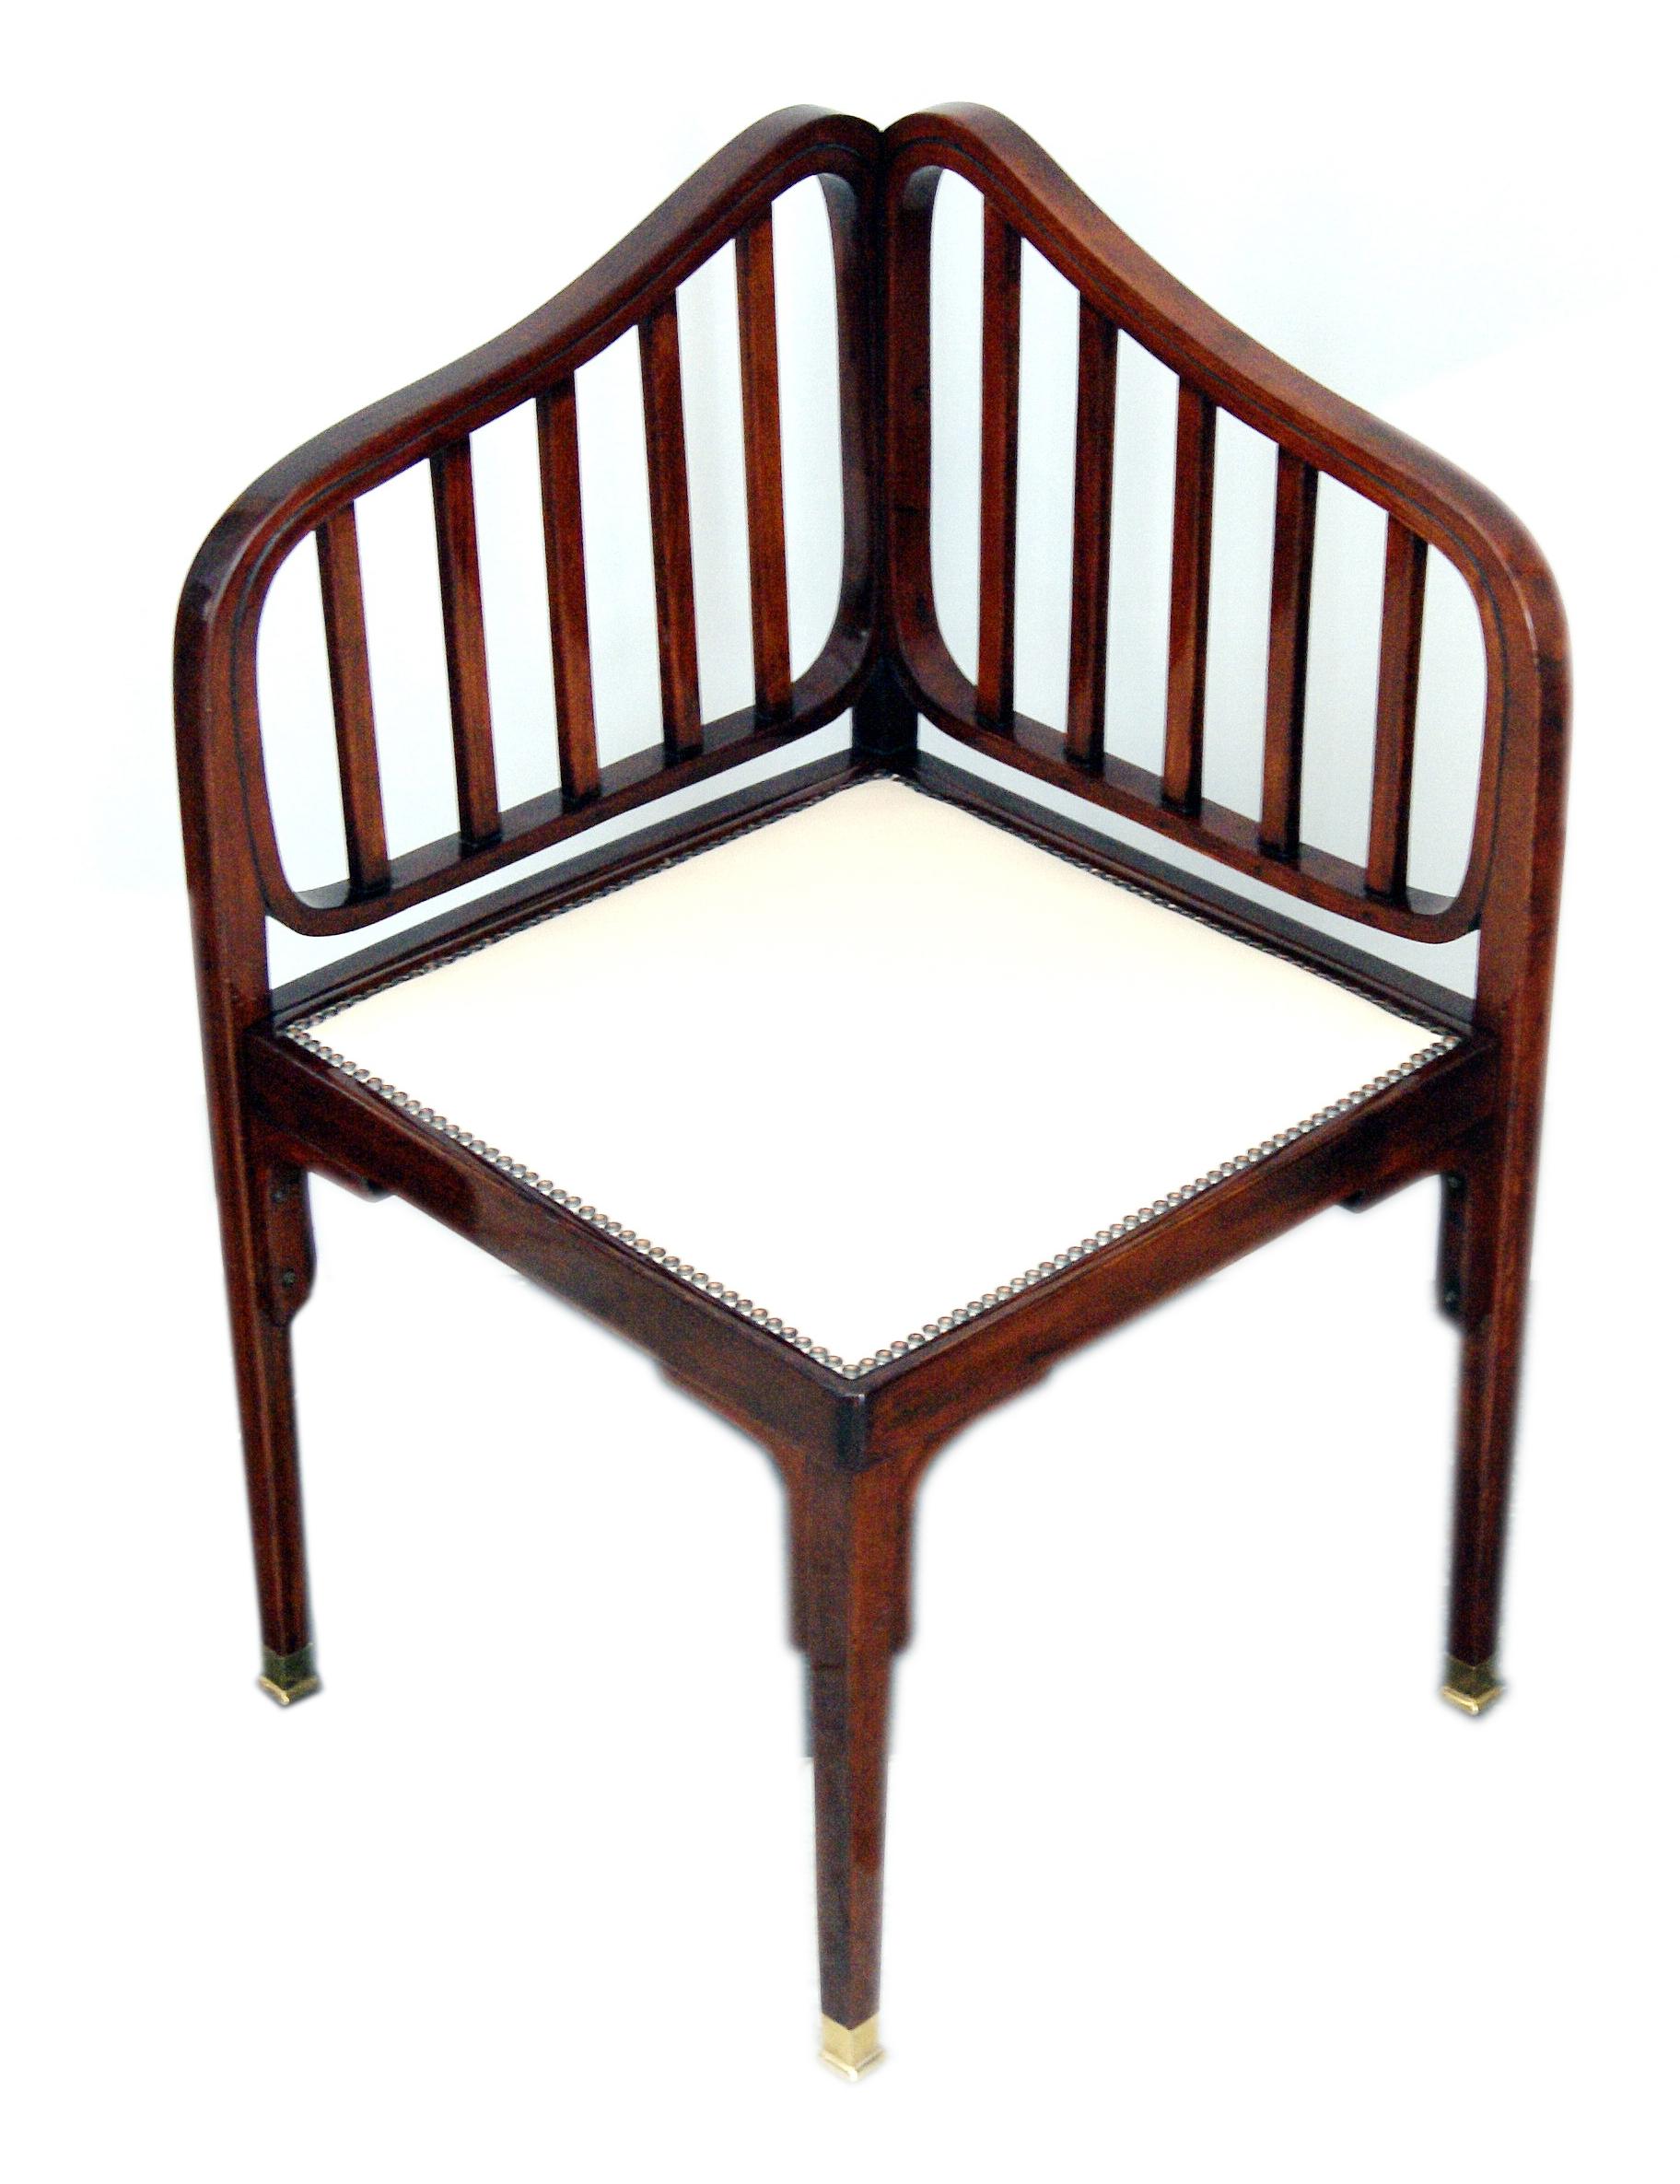 Early 20th Century Jacob & Josef Kohn Vienna Art Nouveau Settee Number 412 by Otto Wagner c.1901 For Sale